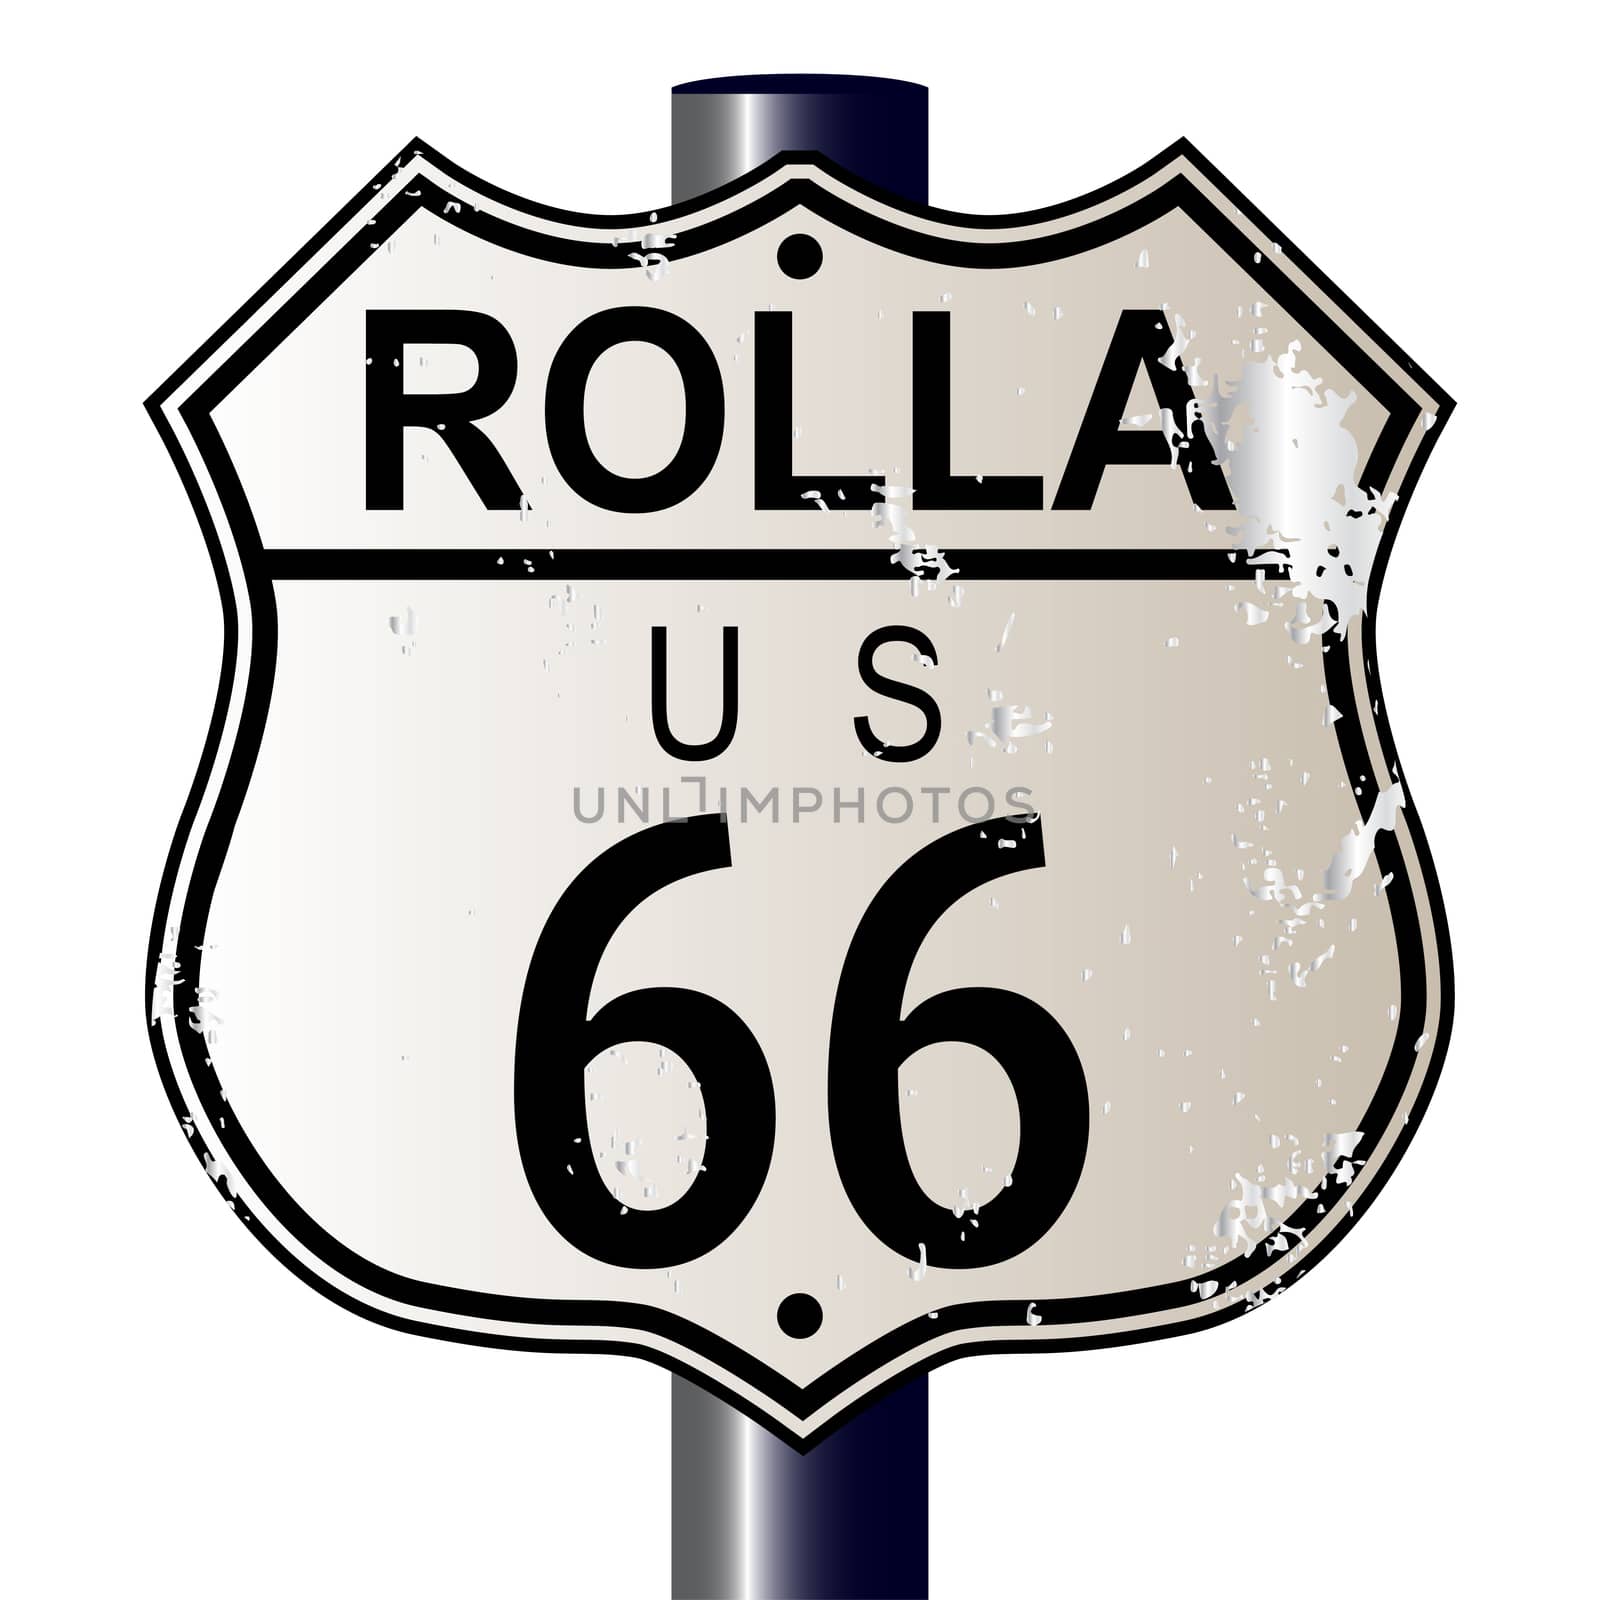 Rolla Route 66 traffic sign over a white background and the legend ROUTE US 66